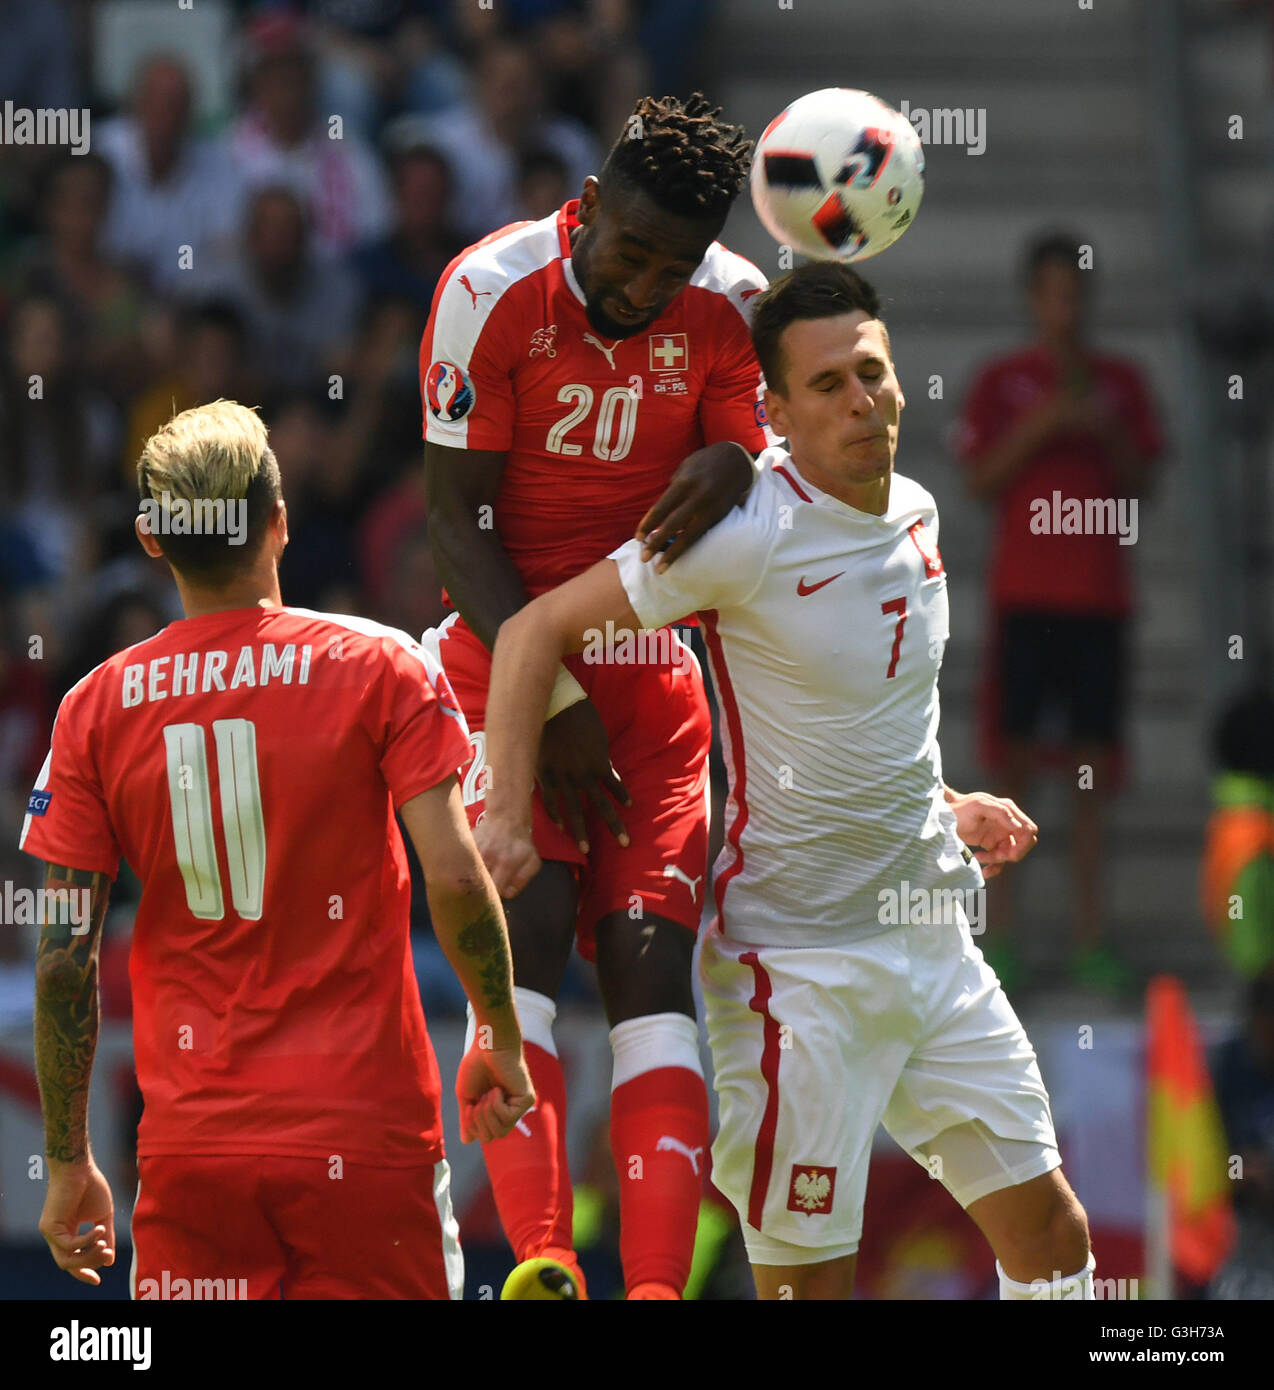 Saint-Etienne, France. 25th June, 2016. Switzerland's Johan Djourou (Top) competes during the Euro 2016 round of sixteen football match between Switzerland and Poland in Saint-Etienne on June 25, 2016. Credit:  Xinhua/Alamy Live News Stock Photo